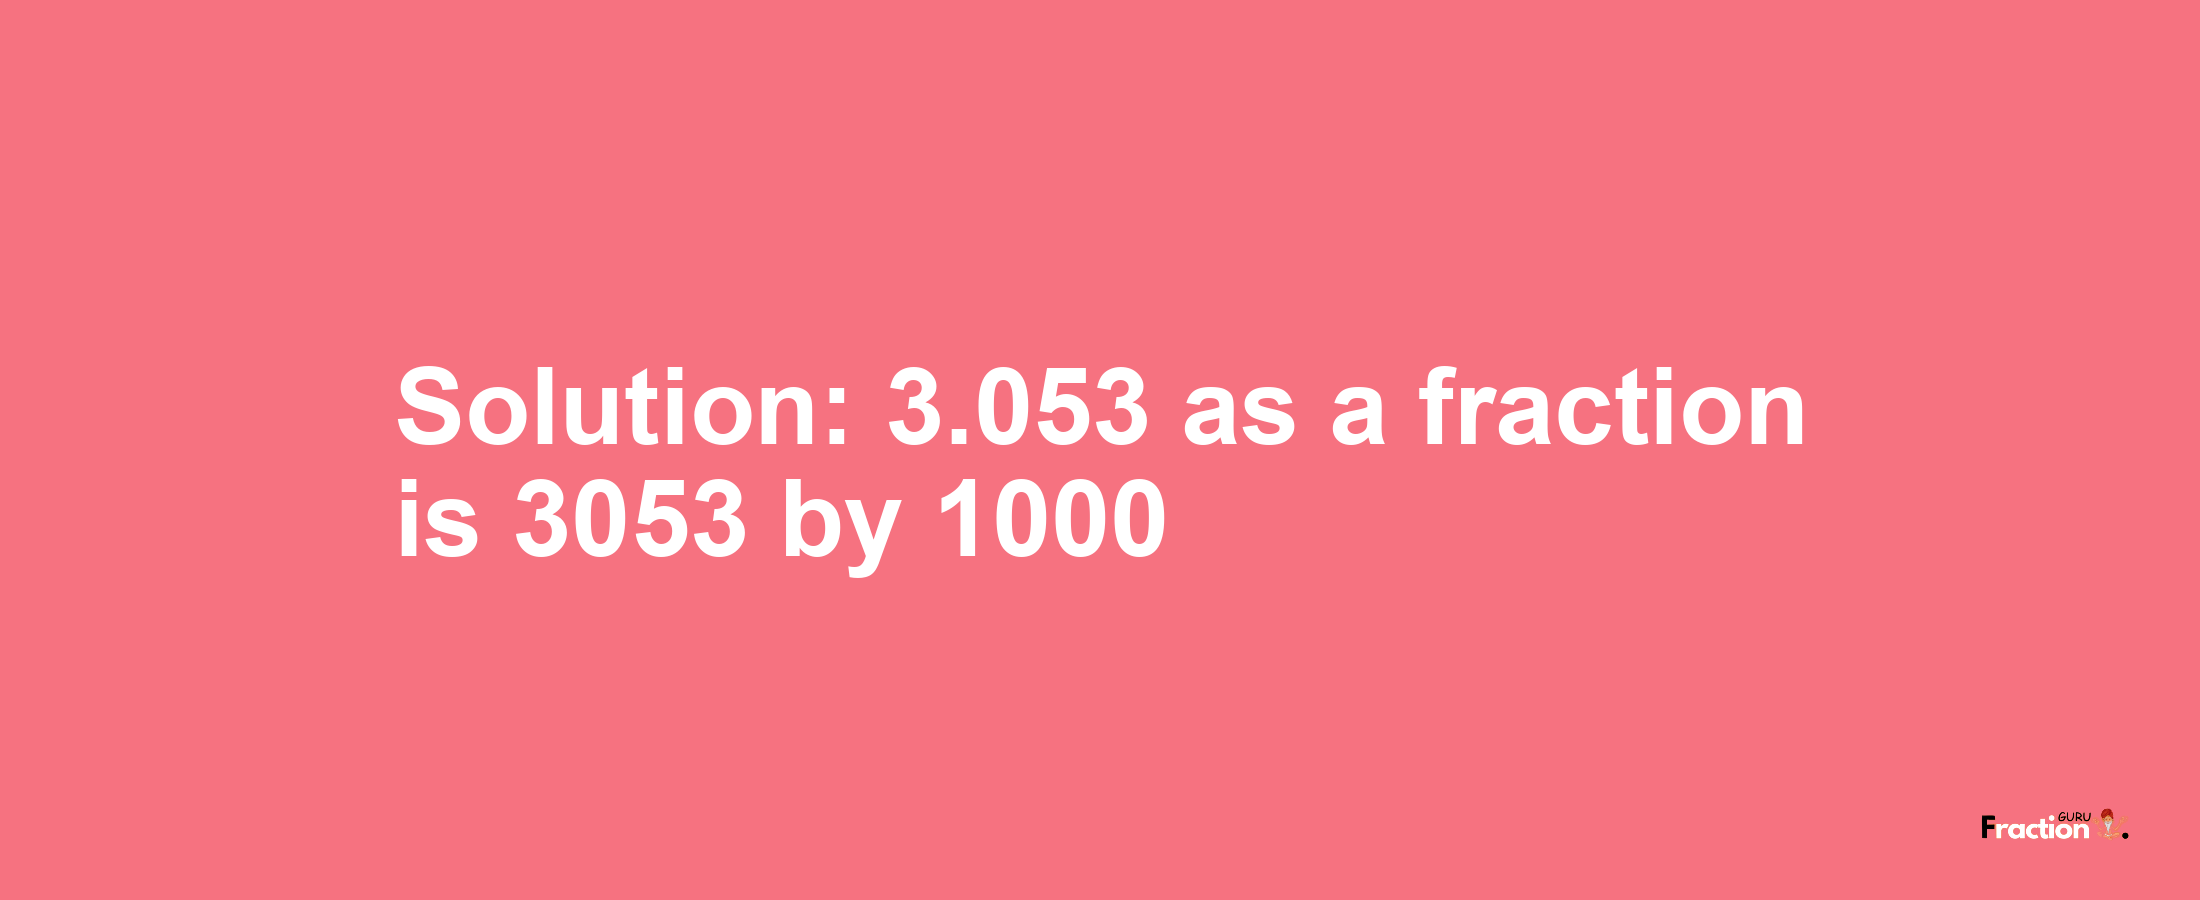 Solution:3.053 as a fraction is 3053/1000